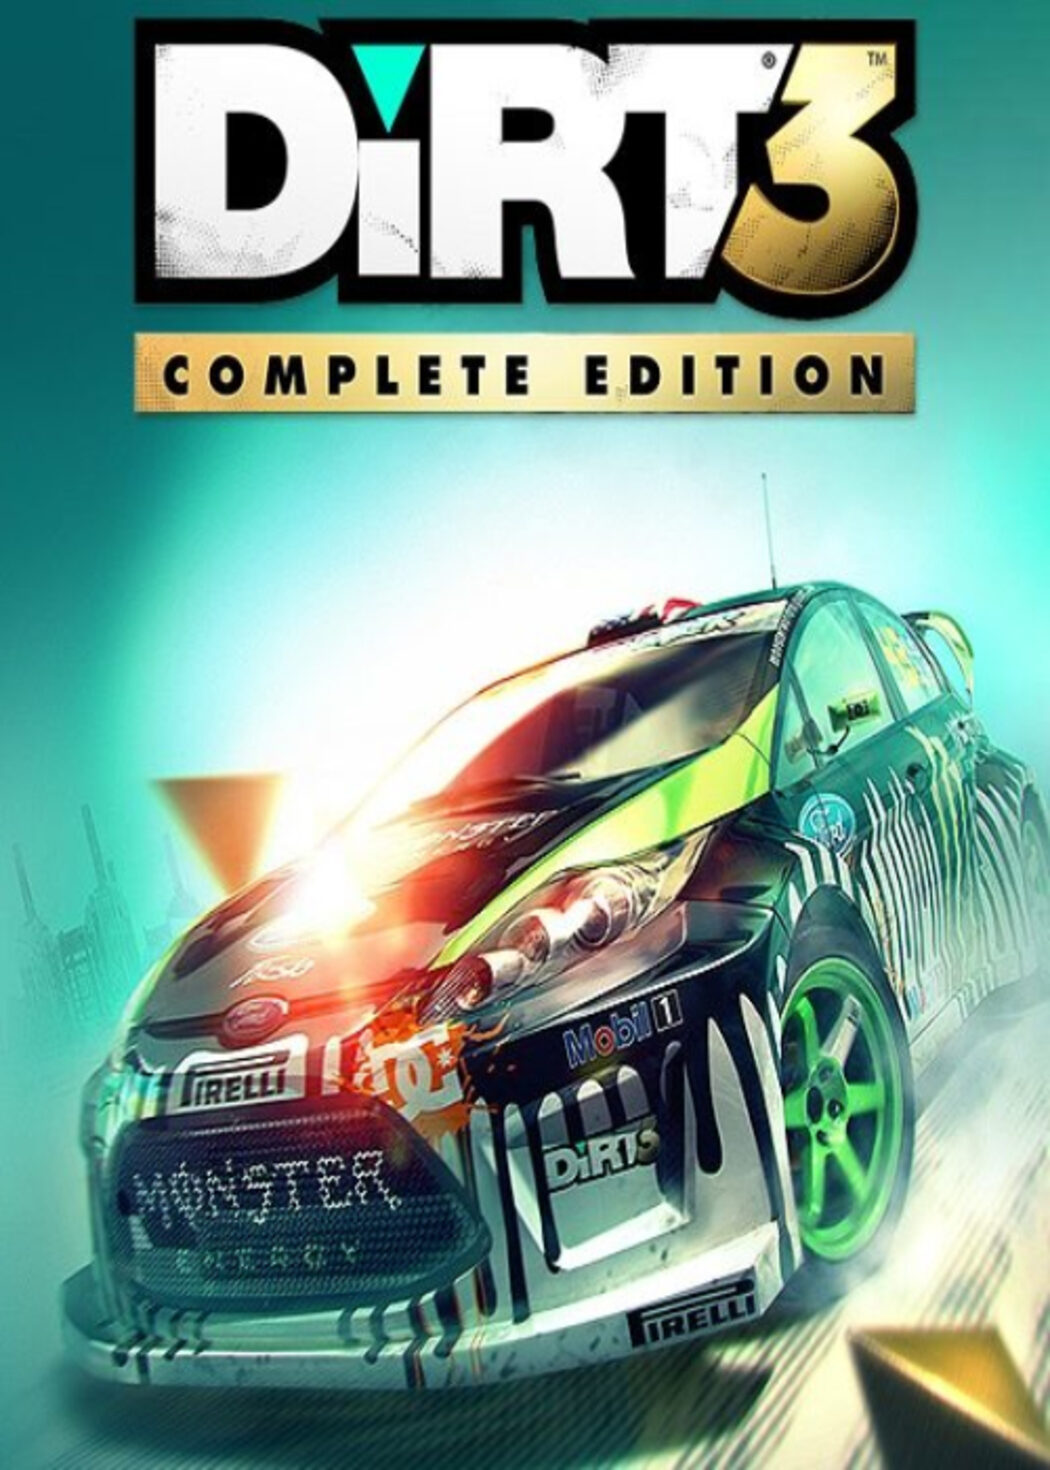 Dirt 3 not on steam фото 11